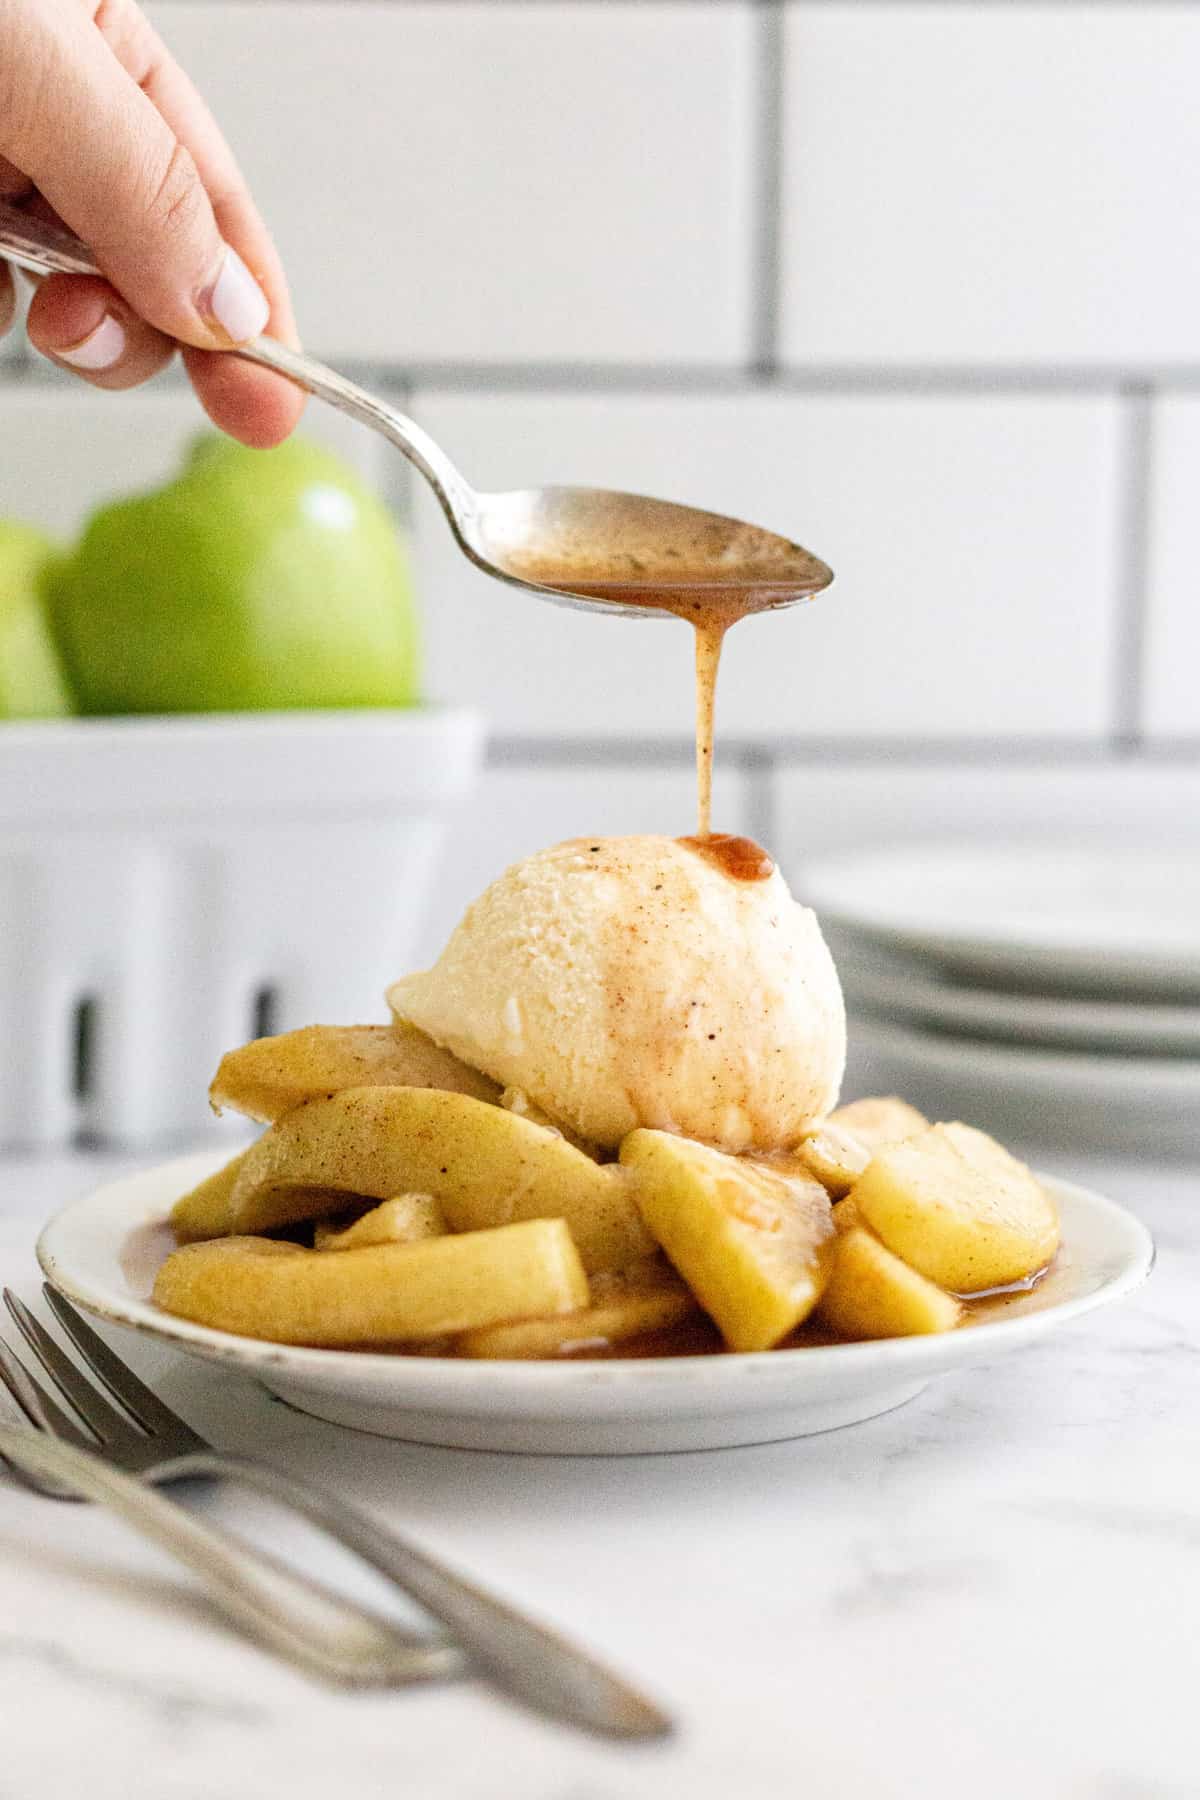 syrup poured on top of friend apples with a scoop of french vanilla ice cream served on a white plate